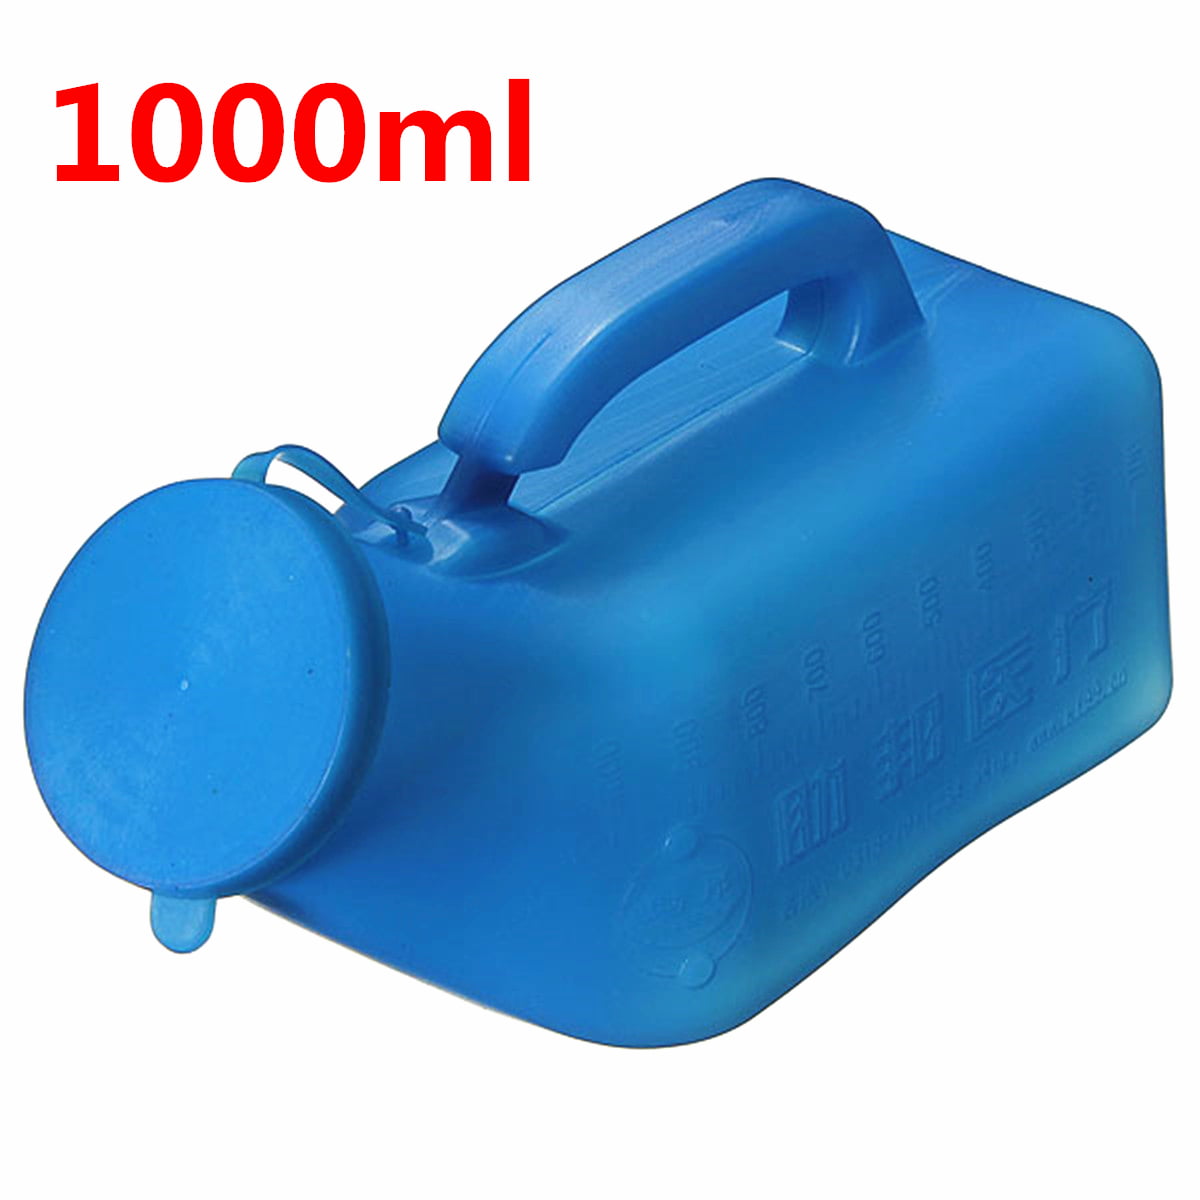 23F4 6BEB Unisex Mobile Urinal Toilet For Car Camping Journey Male Urine Bottle 